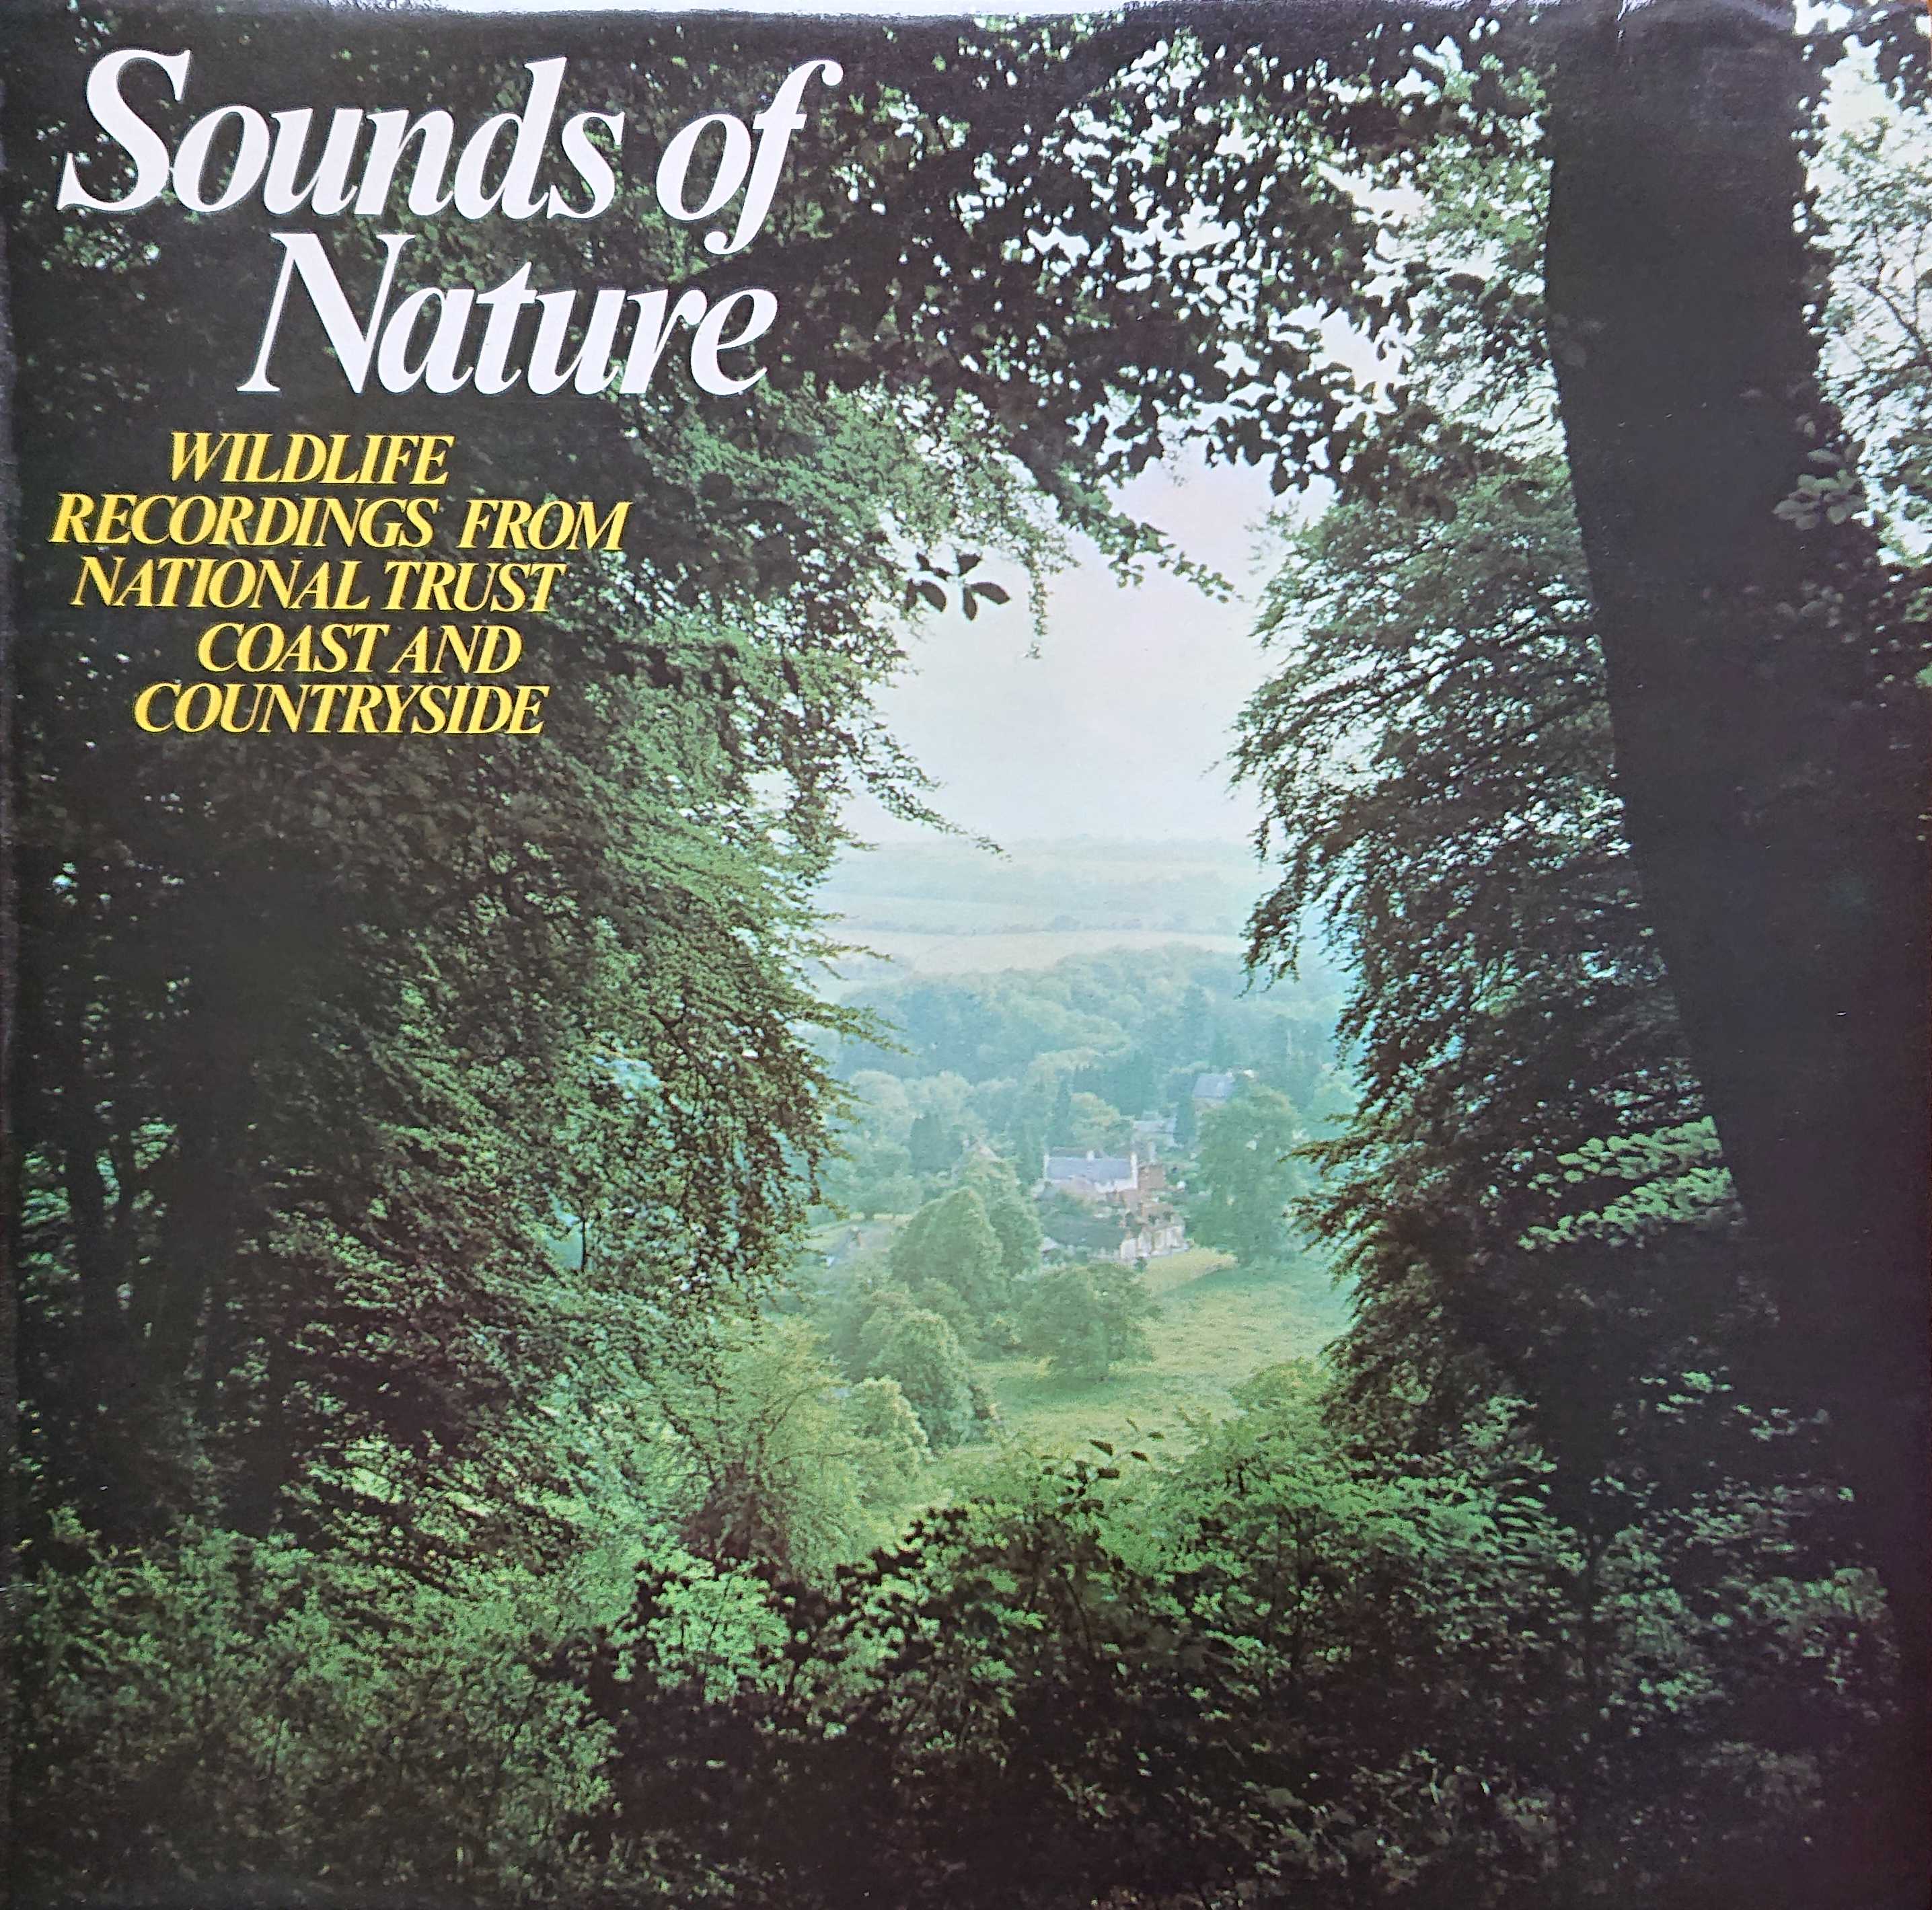 Picture of Sounds of nature by artist Eric Simms from the BBC albums - Records and Tapes library